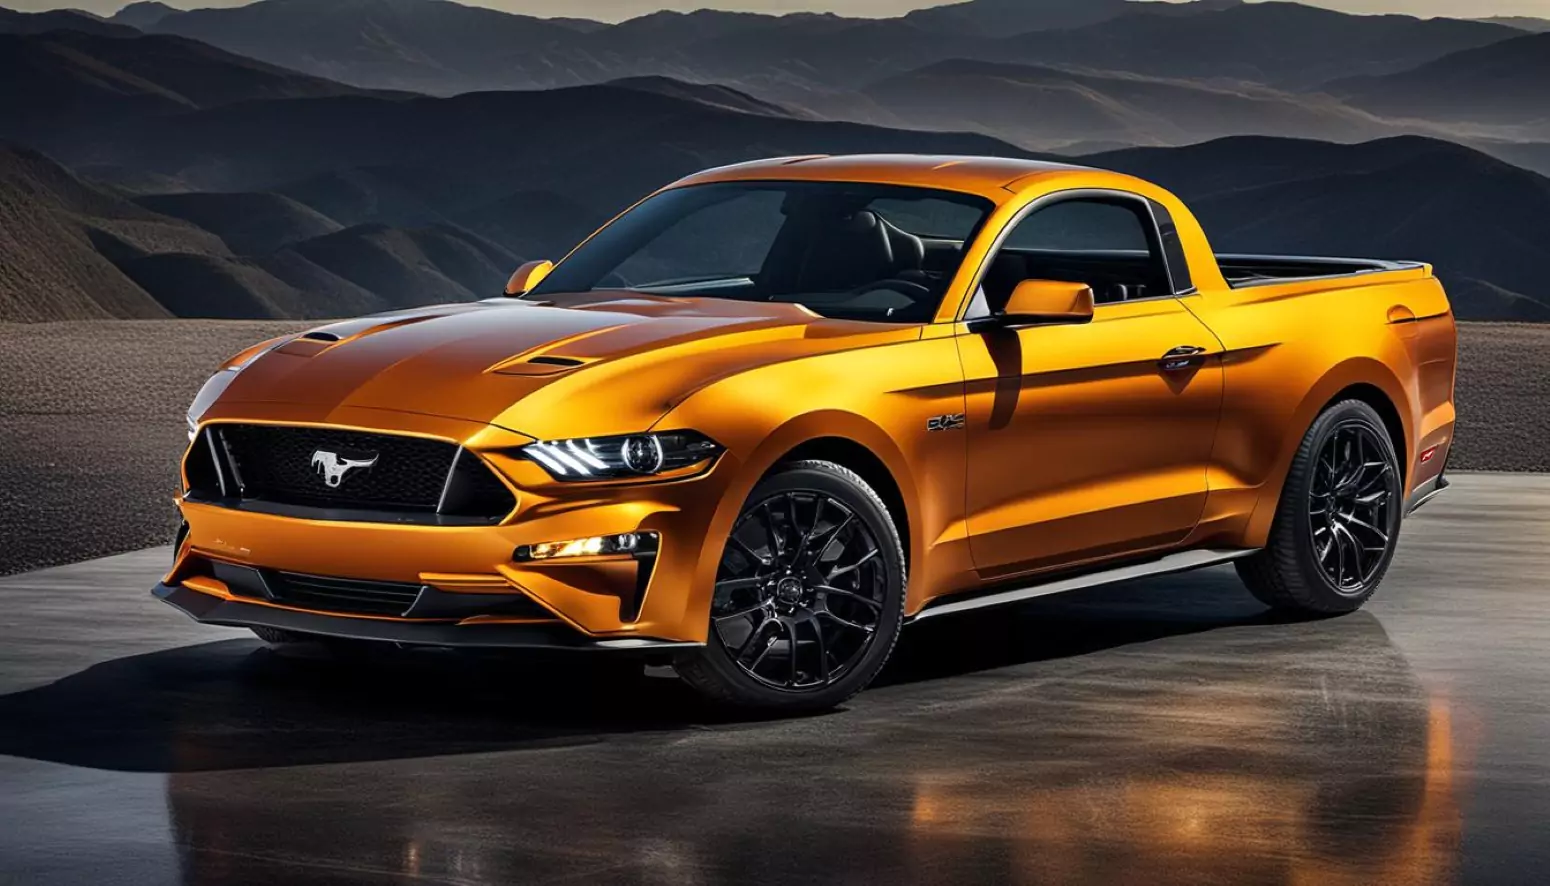 Ford Mustang Pickup Concept / Foto: Planet Cars